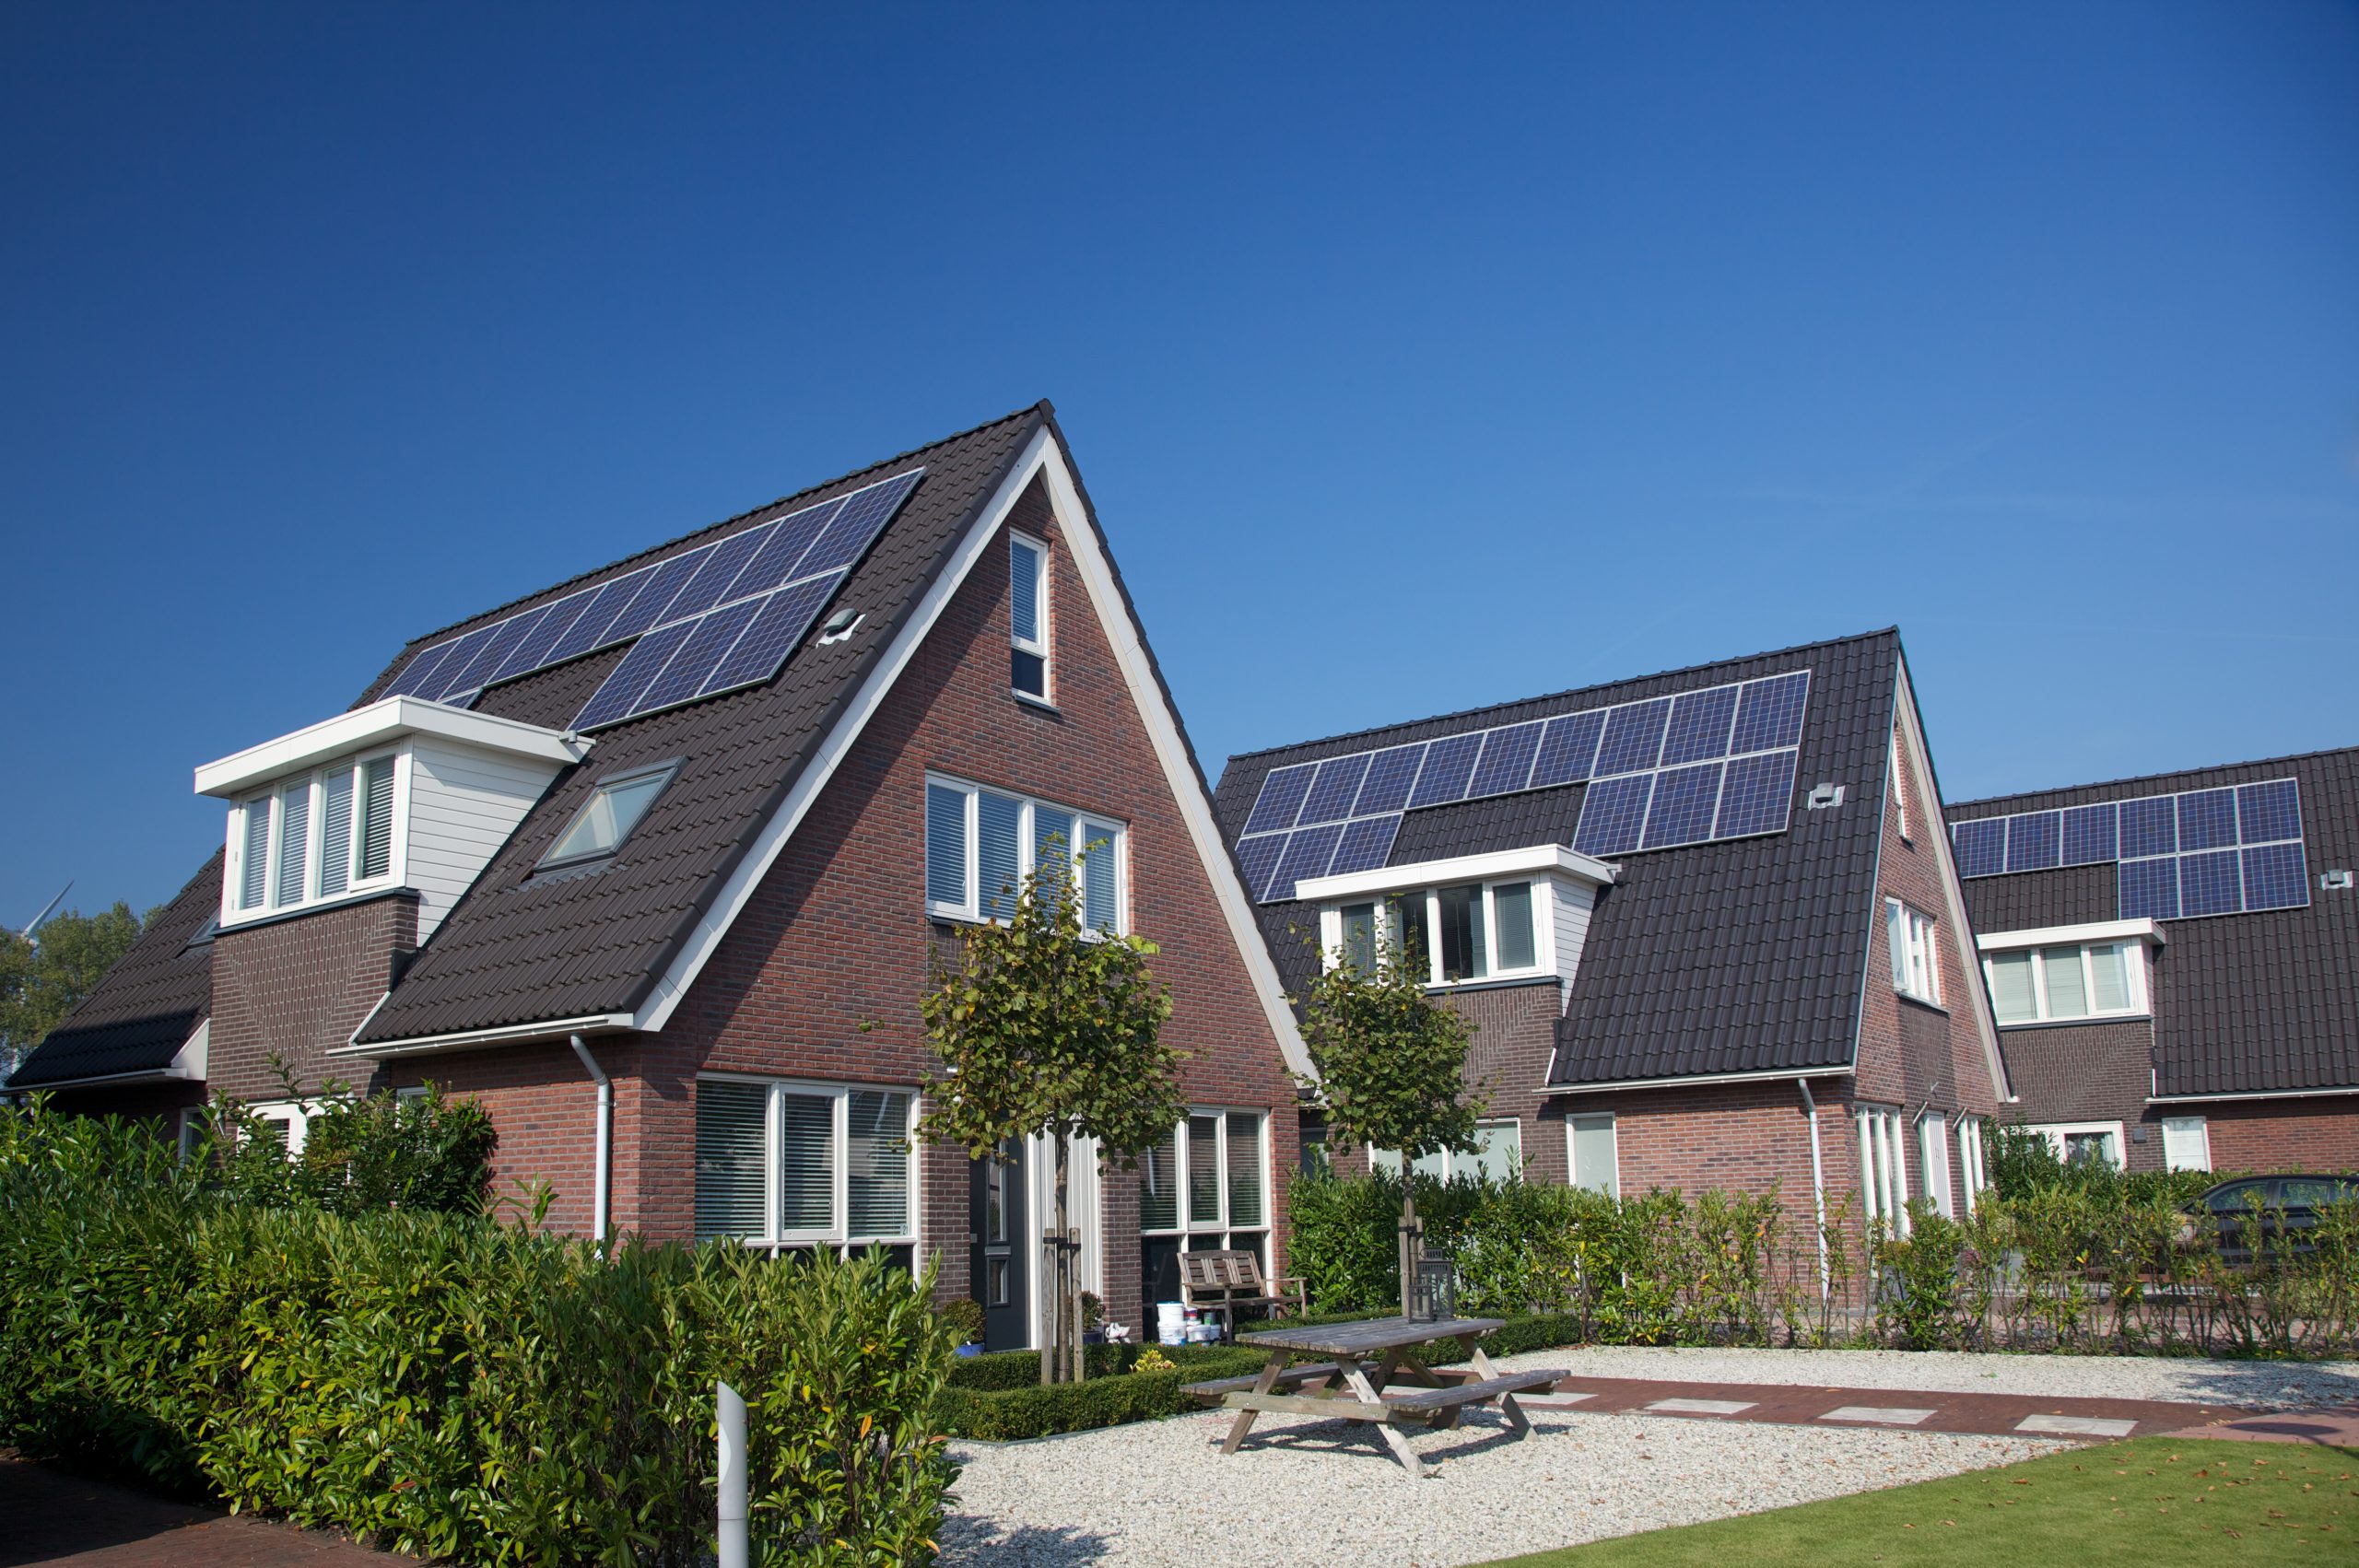 Brick buildings with solar panel systems